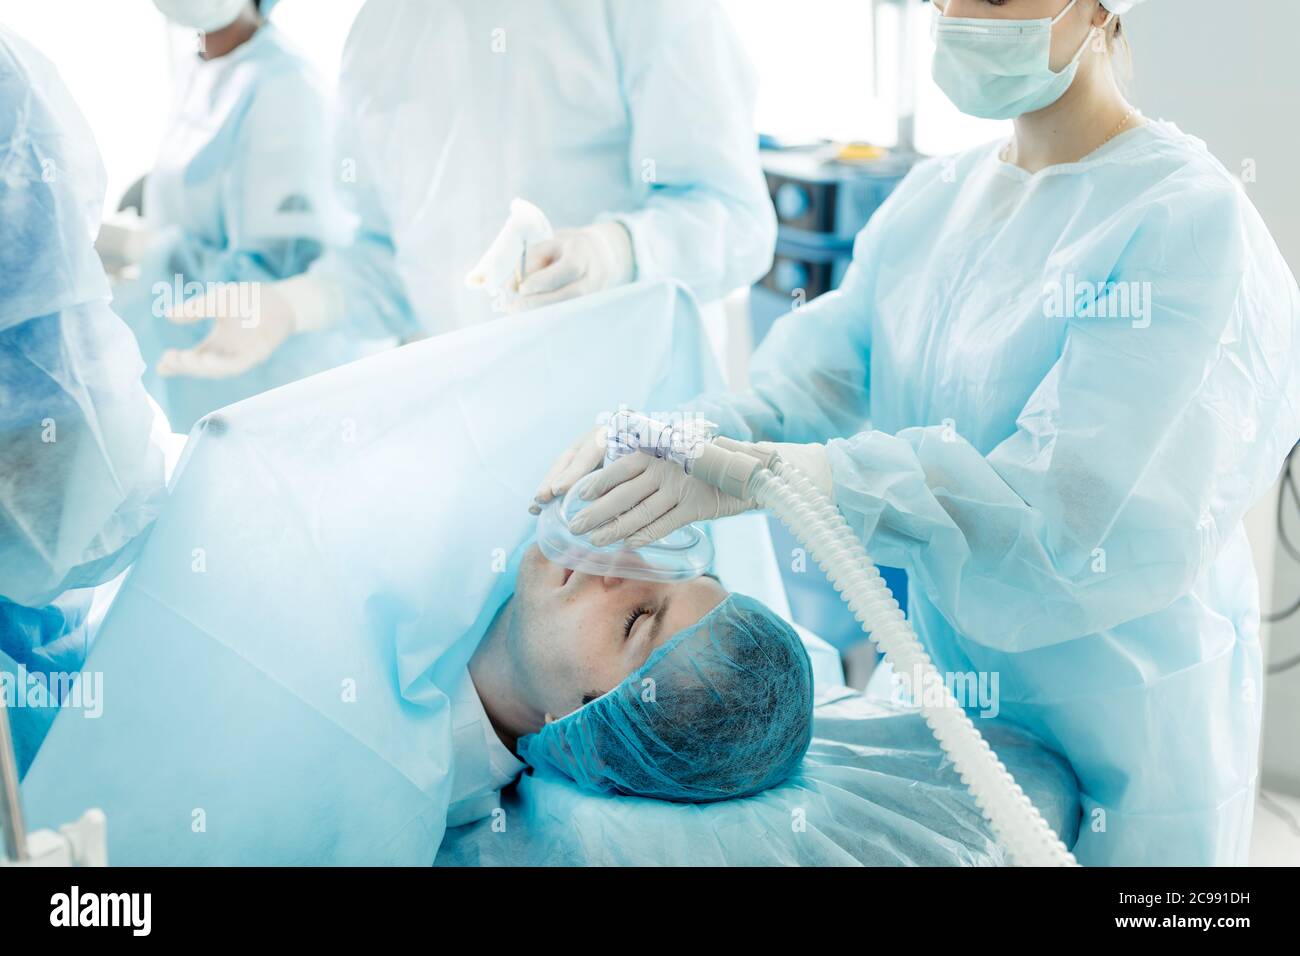 skilled doctor using respiratory equipment to restore lungs function of man. close up side view photo Stock Photo